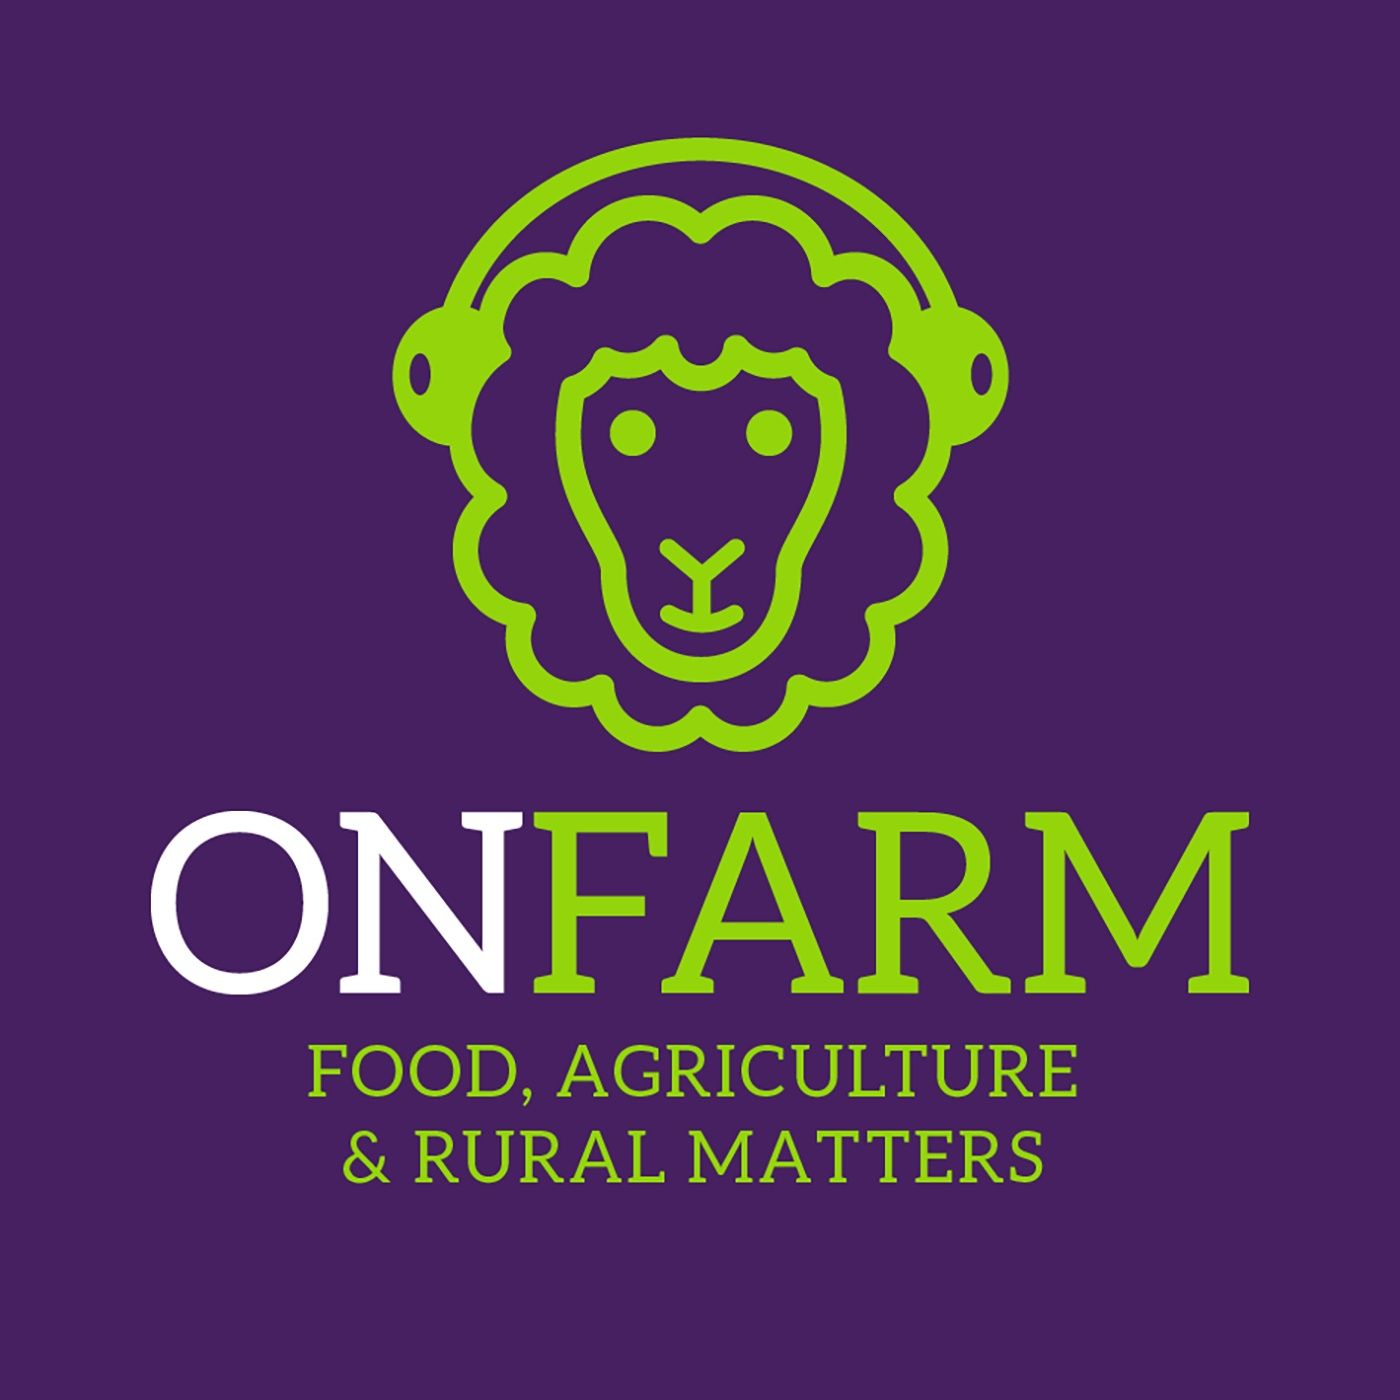 Organic veg and cereal farming in East Lothian